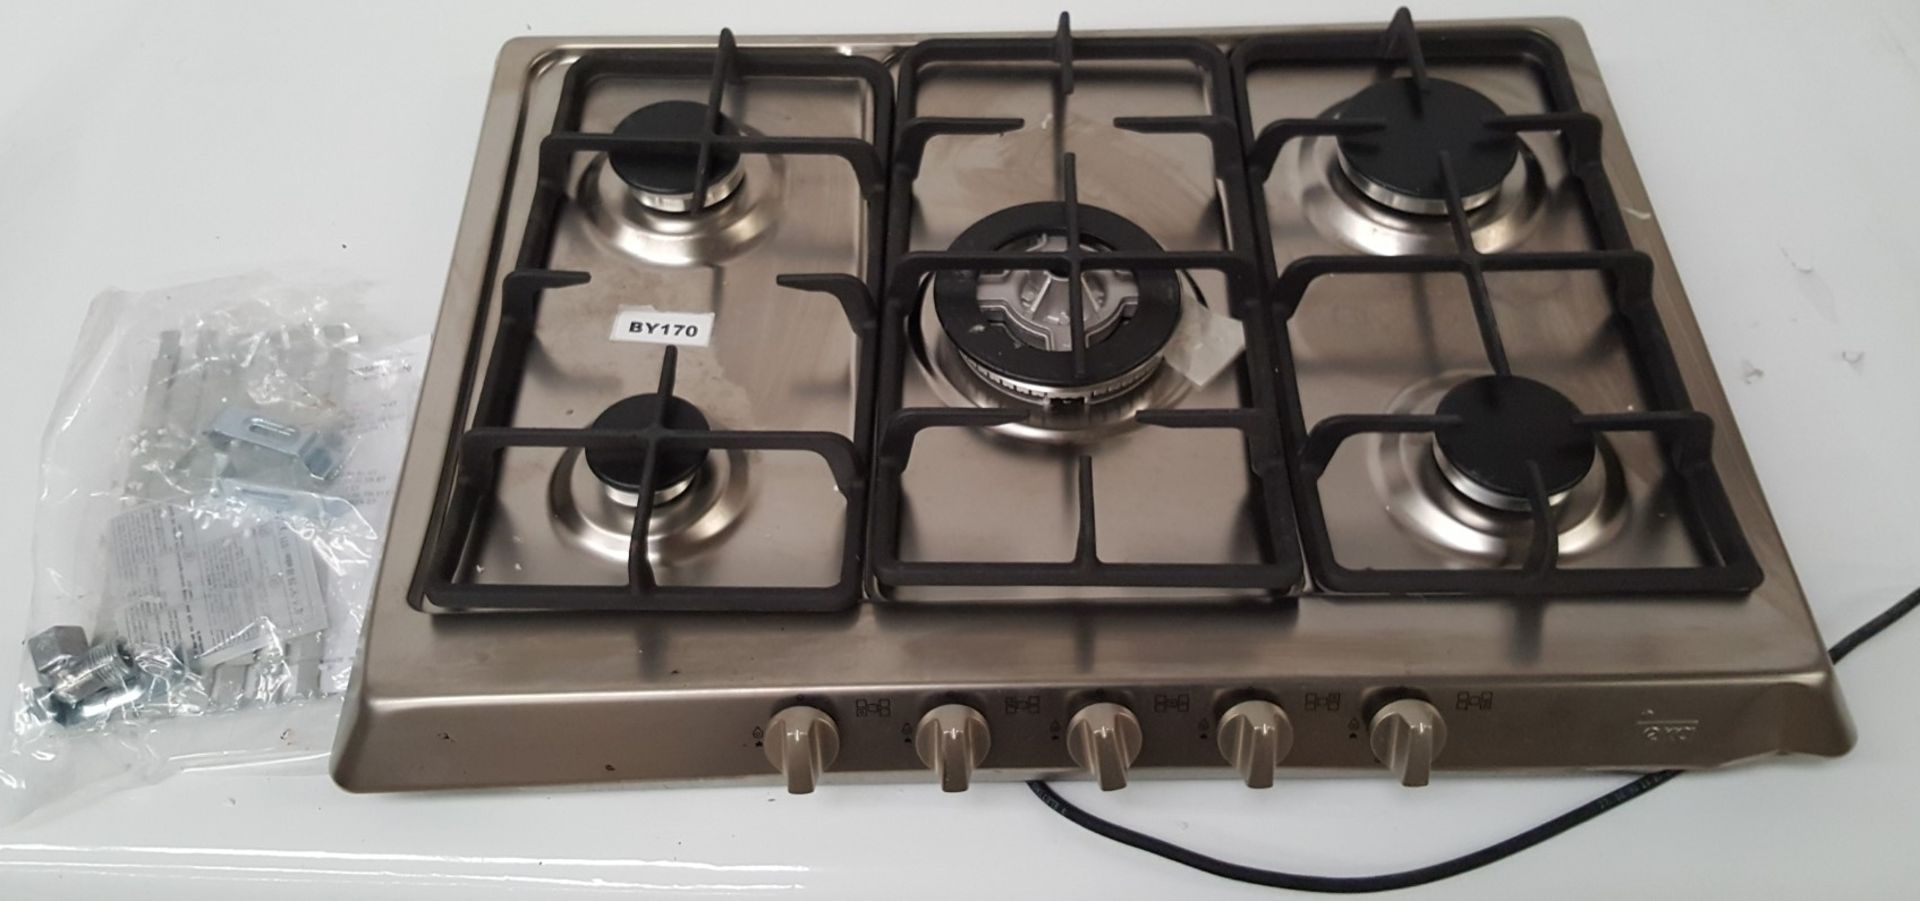 1 x TEKA 70 cm Stainless Steel Finish Gas Hob With 5 Burners - Ref BY170 - Image 3 of 5